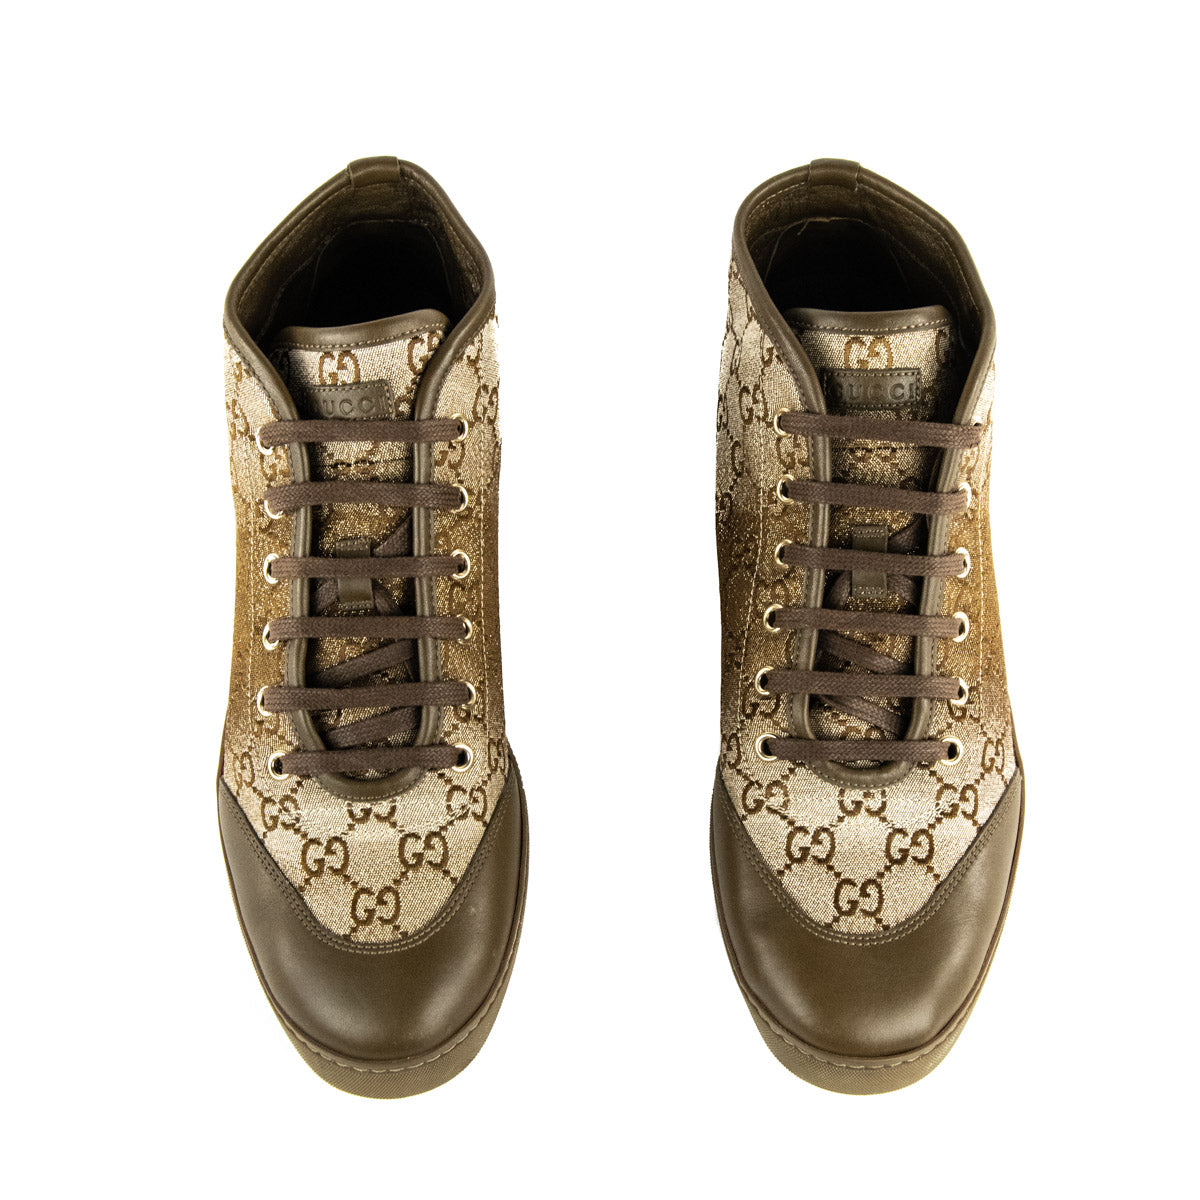 Gucci GG Supreme Charm Embellished High Top Sneakers - Gucci Canada